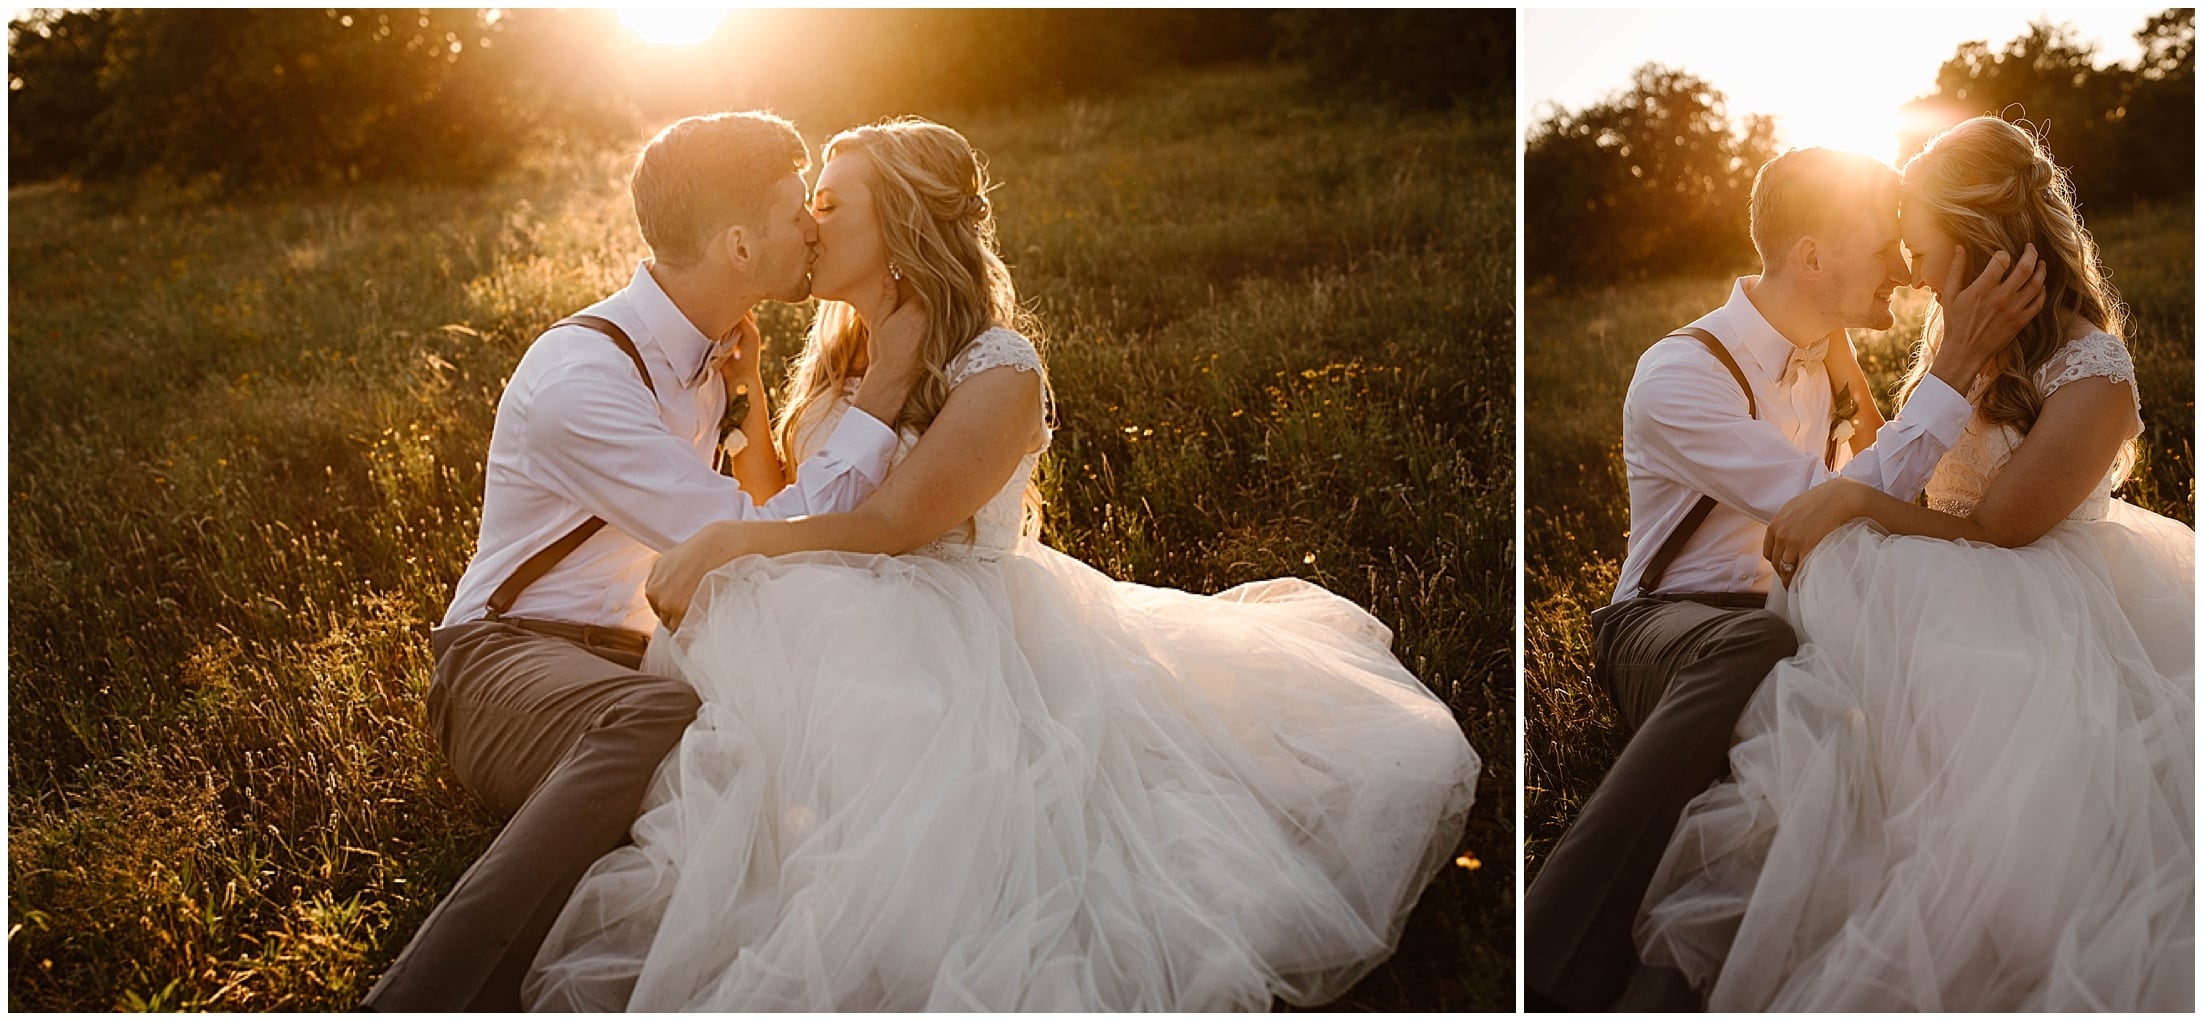 bride and groom intimate photos in texas sunset field, bride and groom sitting in field, Brit Nicole Photography, West Texas Barn Wedding, West Texas Small Wedding, West Texas wedding venue, DJ Platinum, Vera Wang engagement ring, Zales Manly Bands wedding ring, David's Bridal wedding dress, Krazy Cakes brides wedding cake, wedding cupcake, Betsey Johnson wedding high heels, Joy's Downtown Flowers wedding decor, Sparrow Creek Ranch, texas wedding ranch, places to get married in Texas, small intimate wedding, summer wedding, texas sky, bride and groom first look, first look with dad, matching bridesmaids robes, June wedding, junebug weddings, wandering weddings, the knot, best weddings